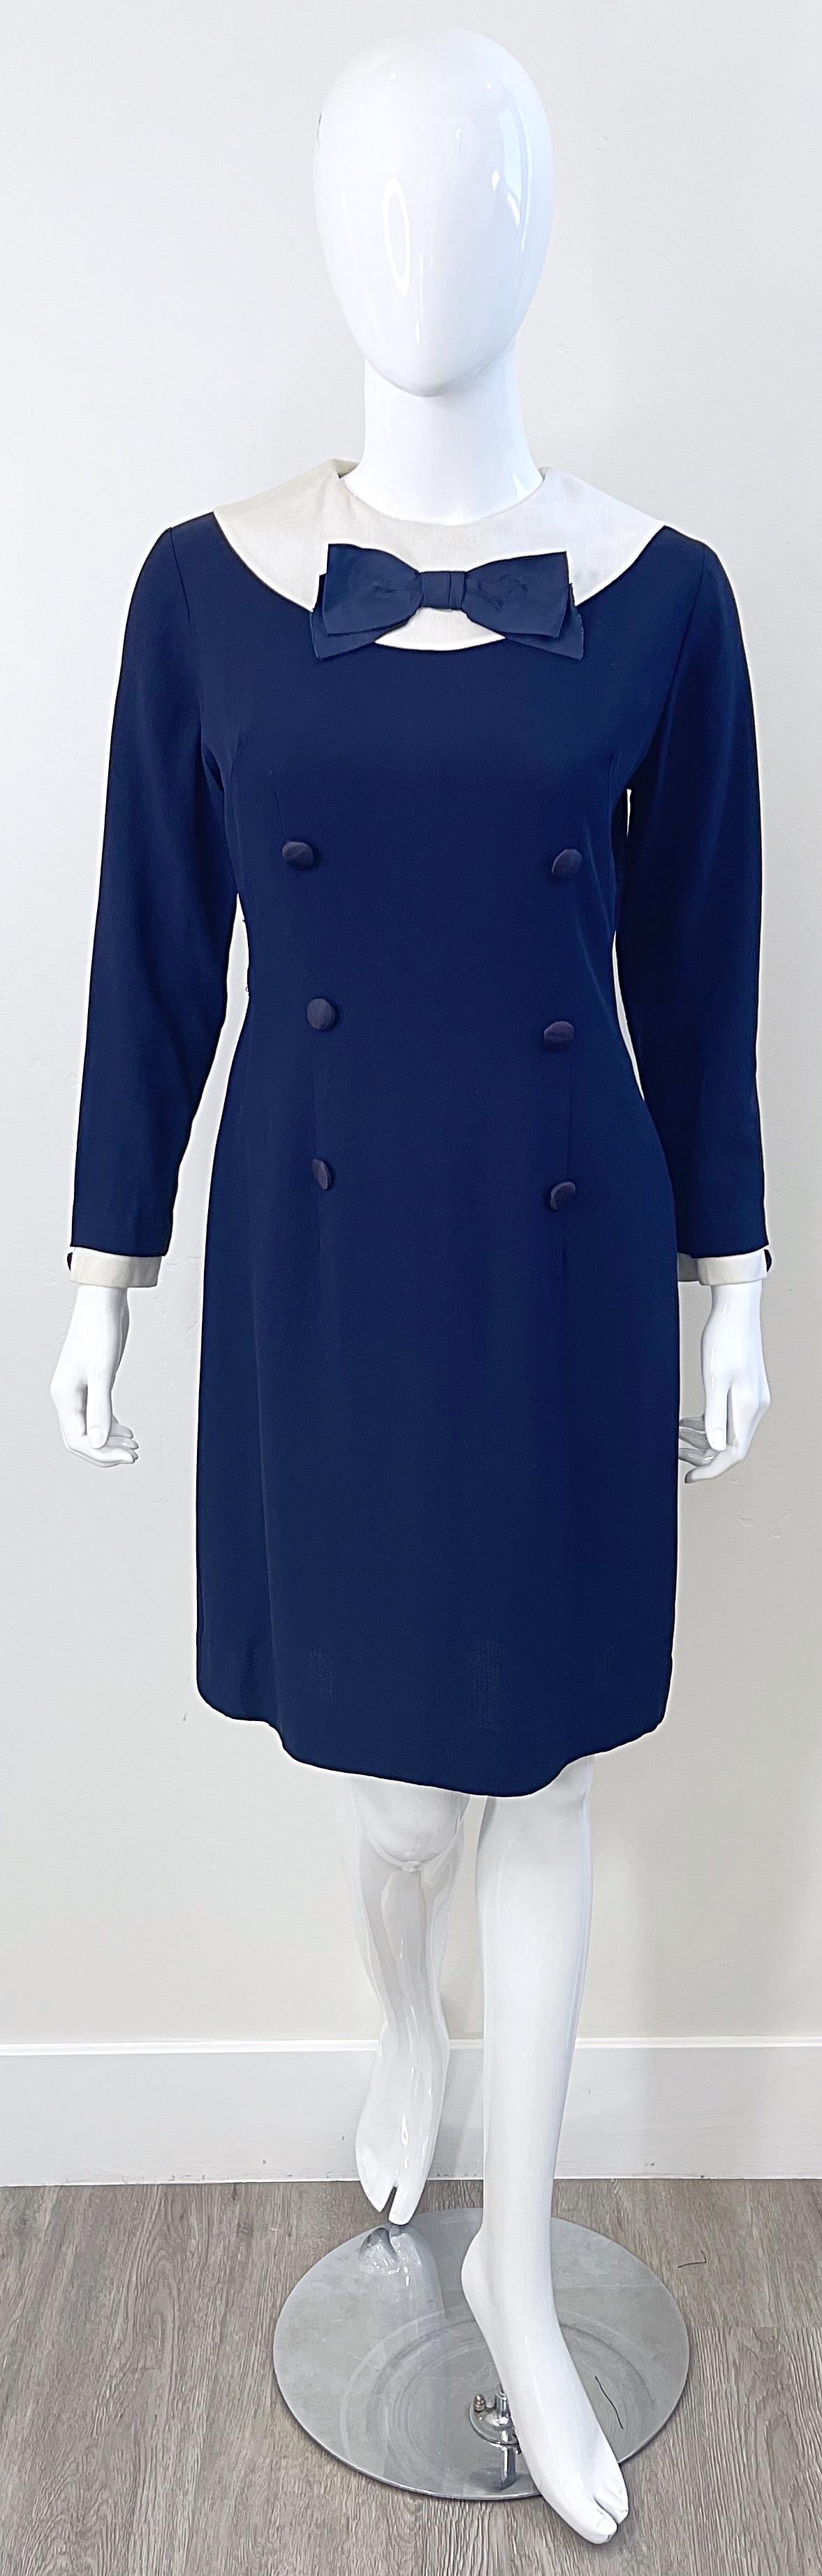 Chic 1960s navy blue and white nautical long sleeve dress ! Features a soft blended fabric of silk and rayon. Silk bow at top center bust. Fully lined. Full metal zipper up the back with hook-and-eye closure.
Dress has been professionally cleaned,